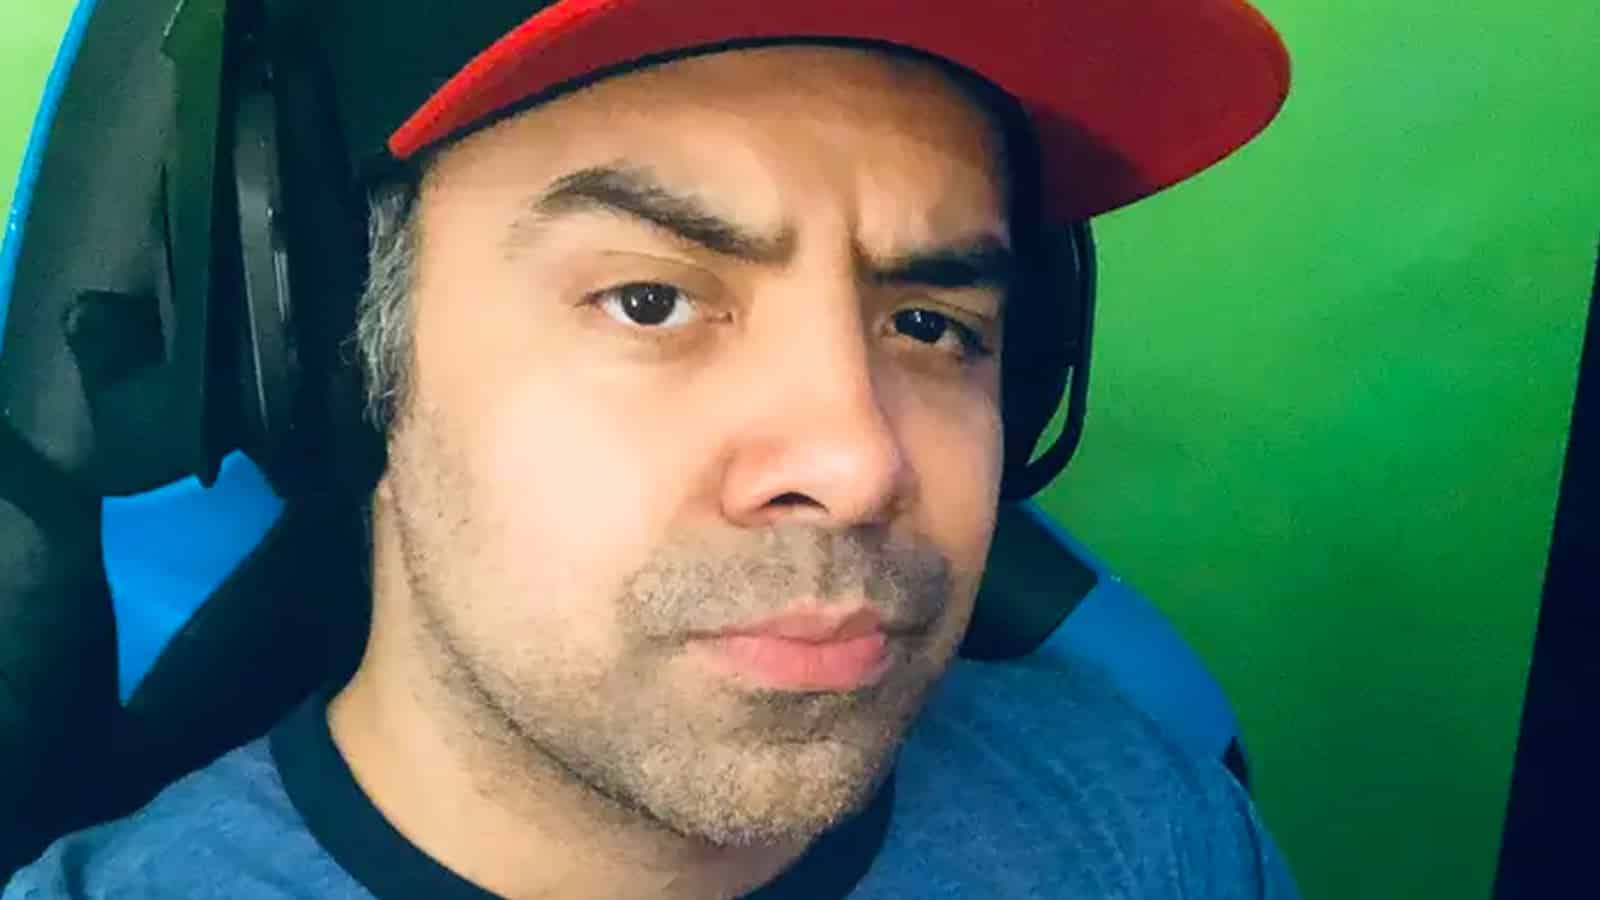 Twitch streamer Prod1gyX arrested on charges of child abuse.